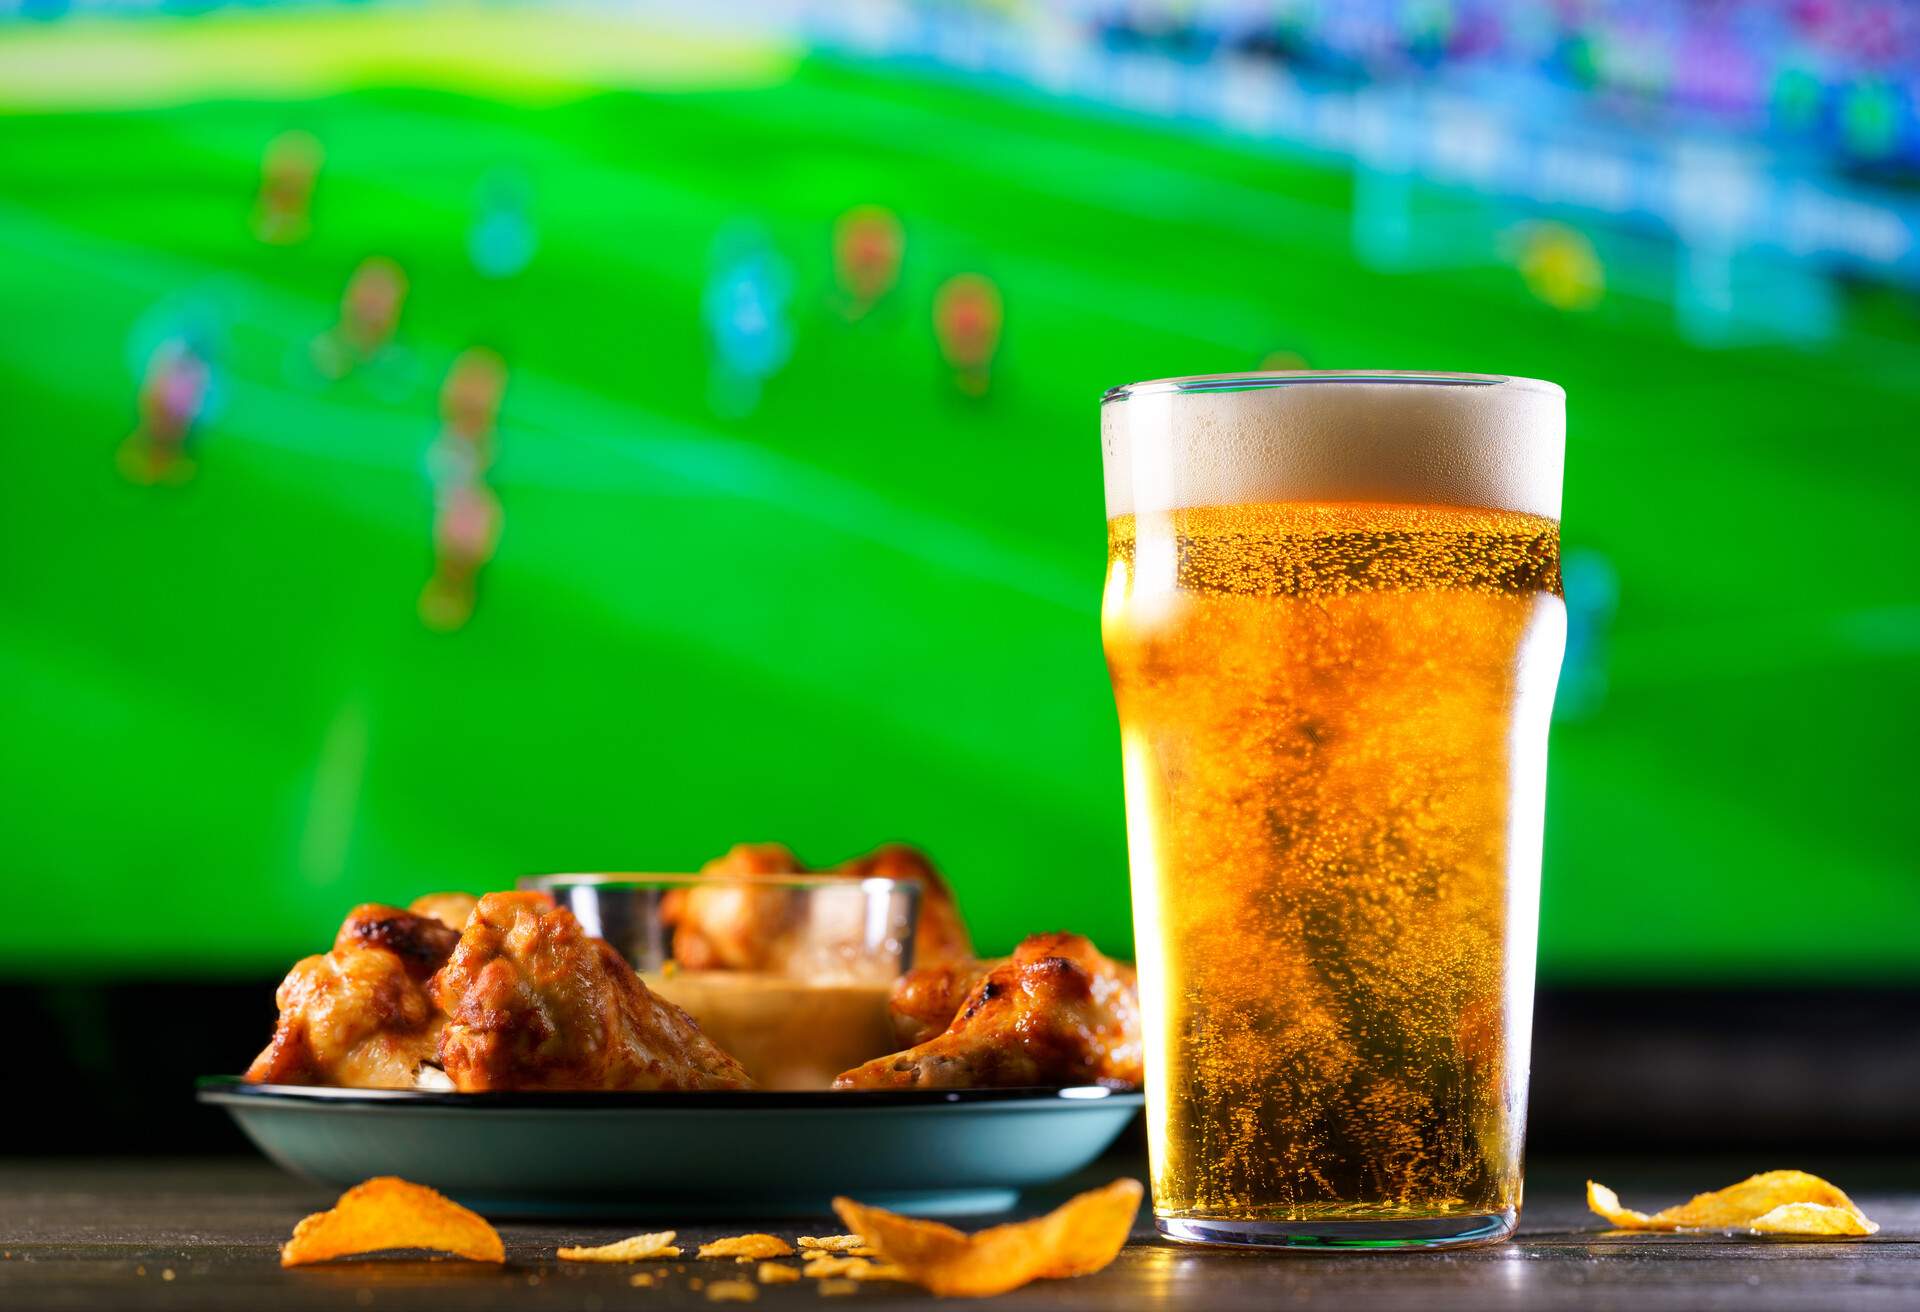 A glass of beer and hot chicken wings on a dark wooden table with crushed potato chips. Football on a background, high resolution; Shutterstock ID 1125372422